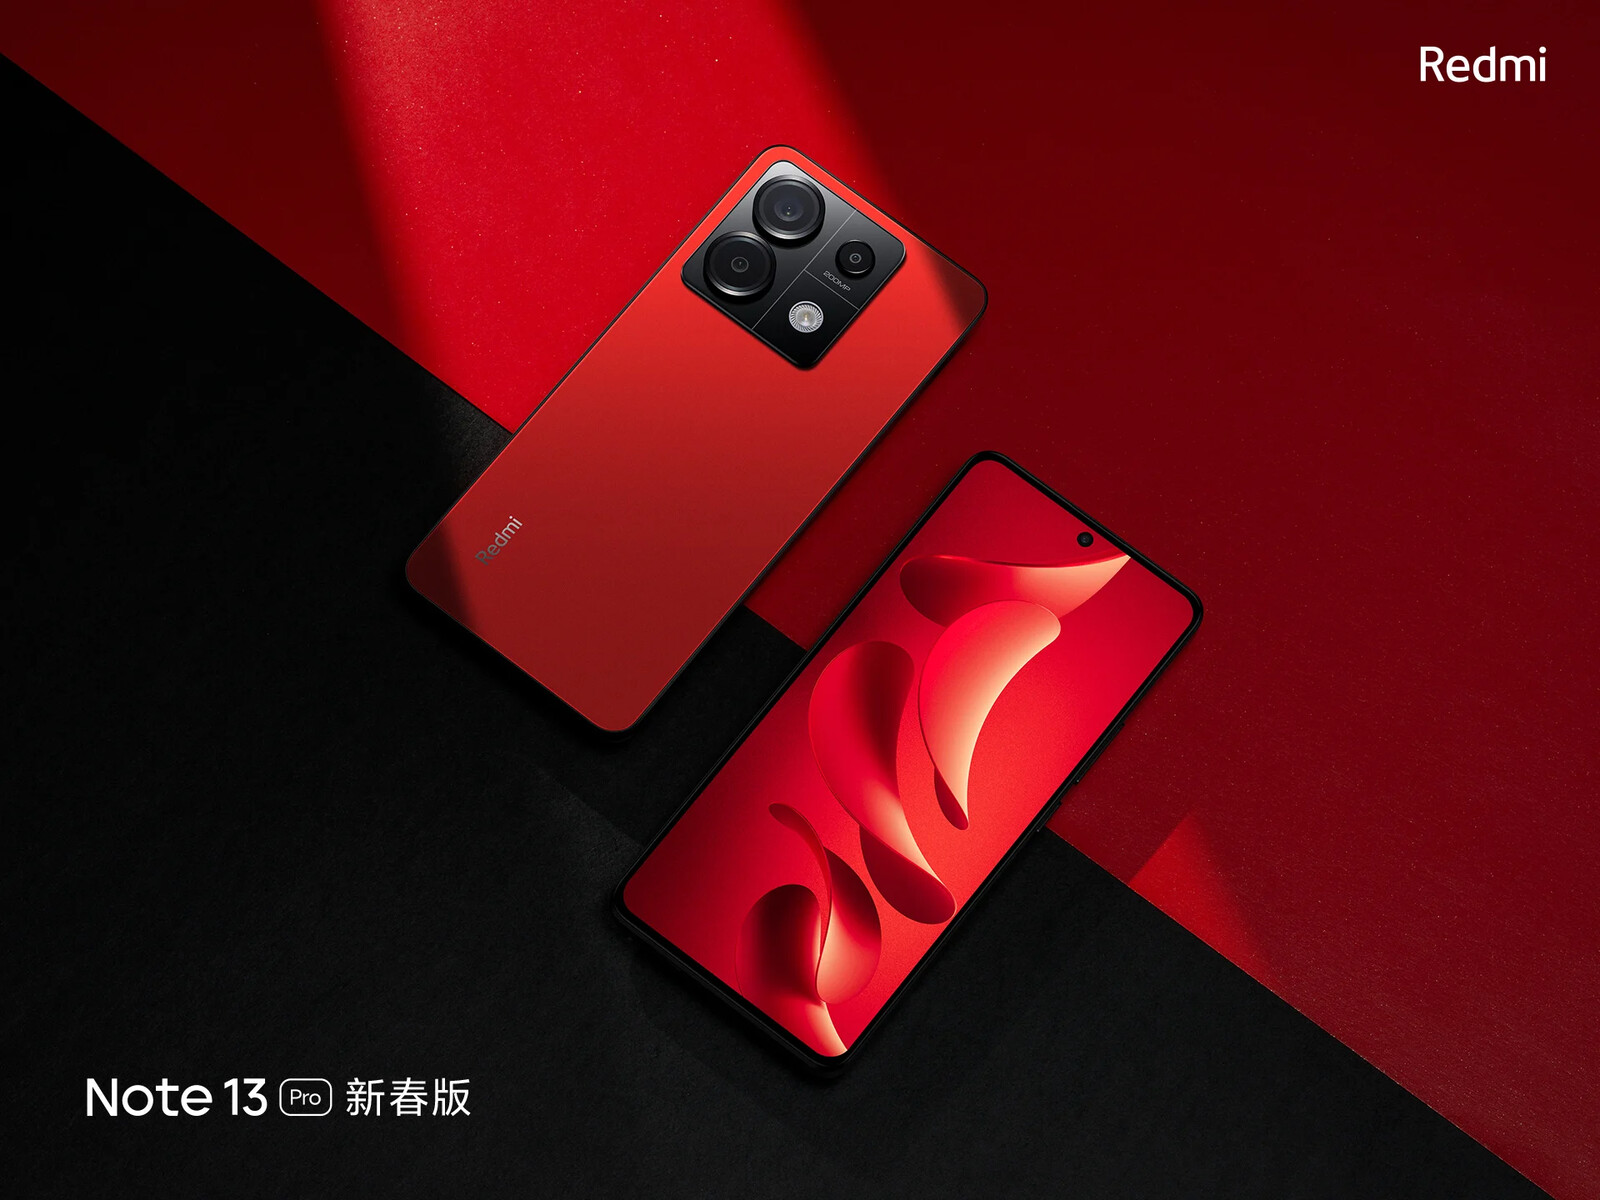 Xiaomi Redmi Note 13 Pro 5G refresh arrives with eye-catching special  edition design -  News